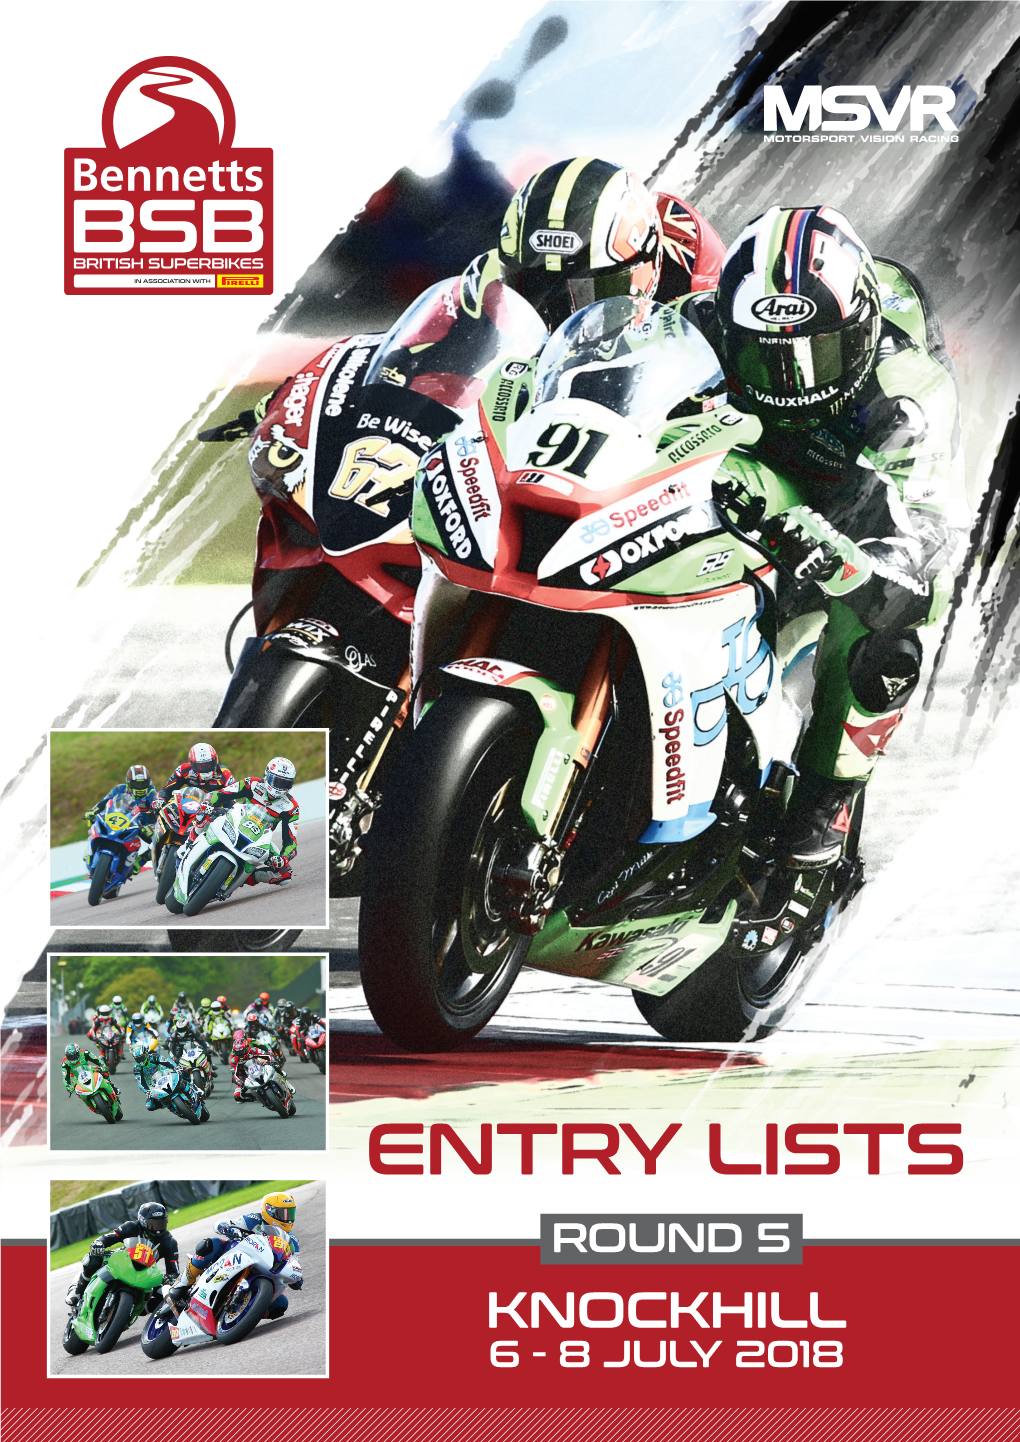 Entry Lists Round 5 Knockhill 6 - 8 July 2018